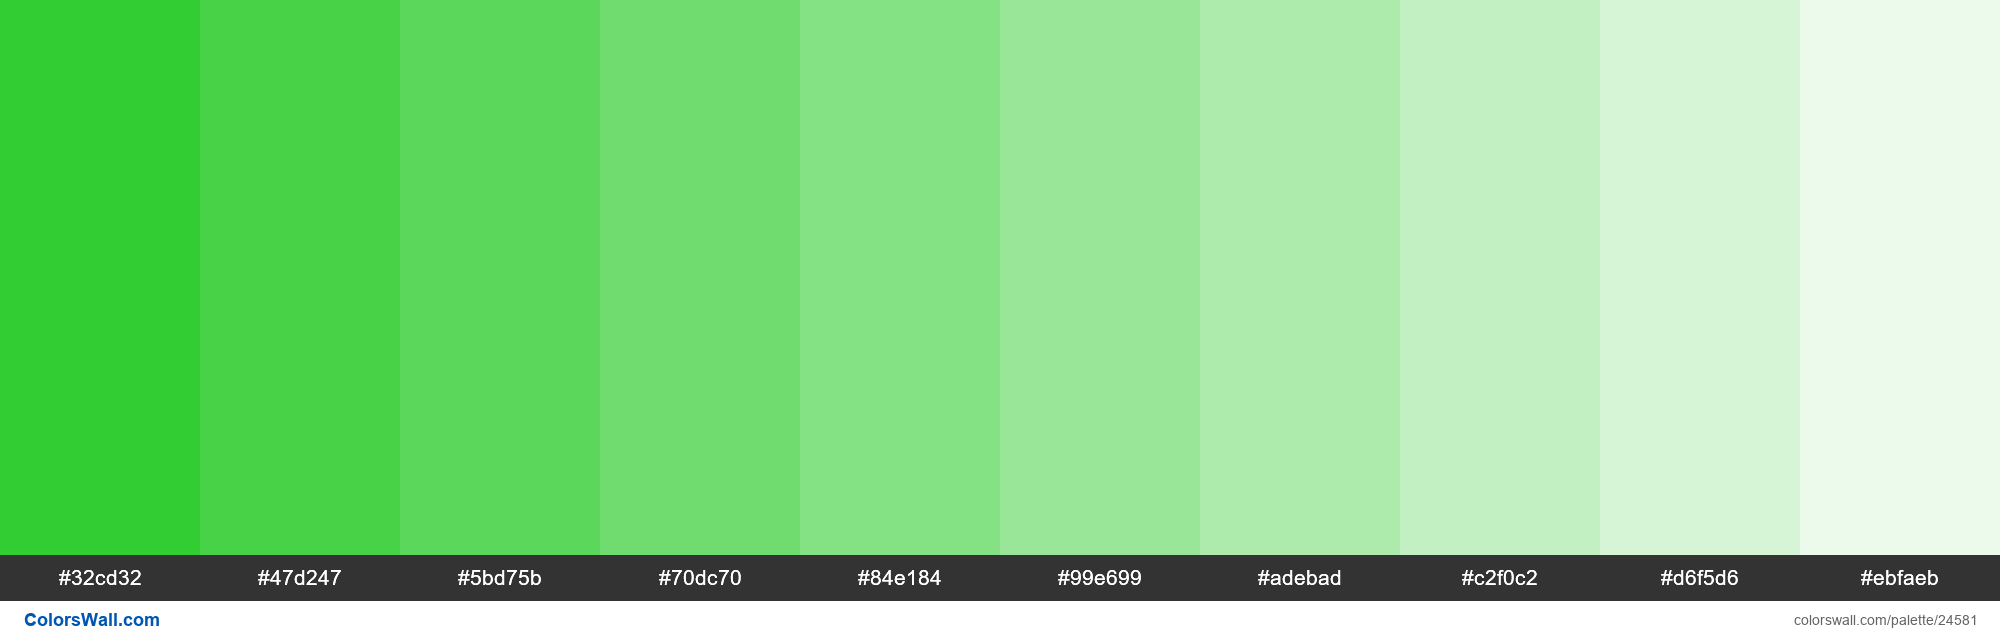 Tints Of Lime Green 32cd32 Hex Color 24581 Colorswall 